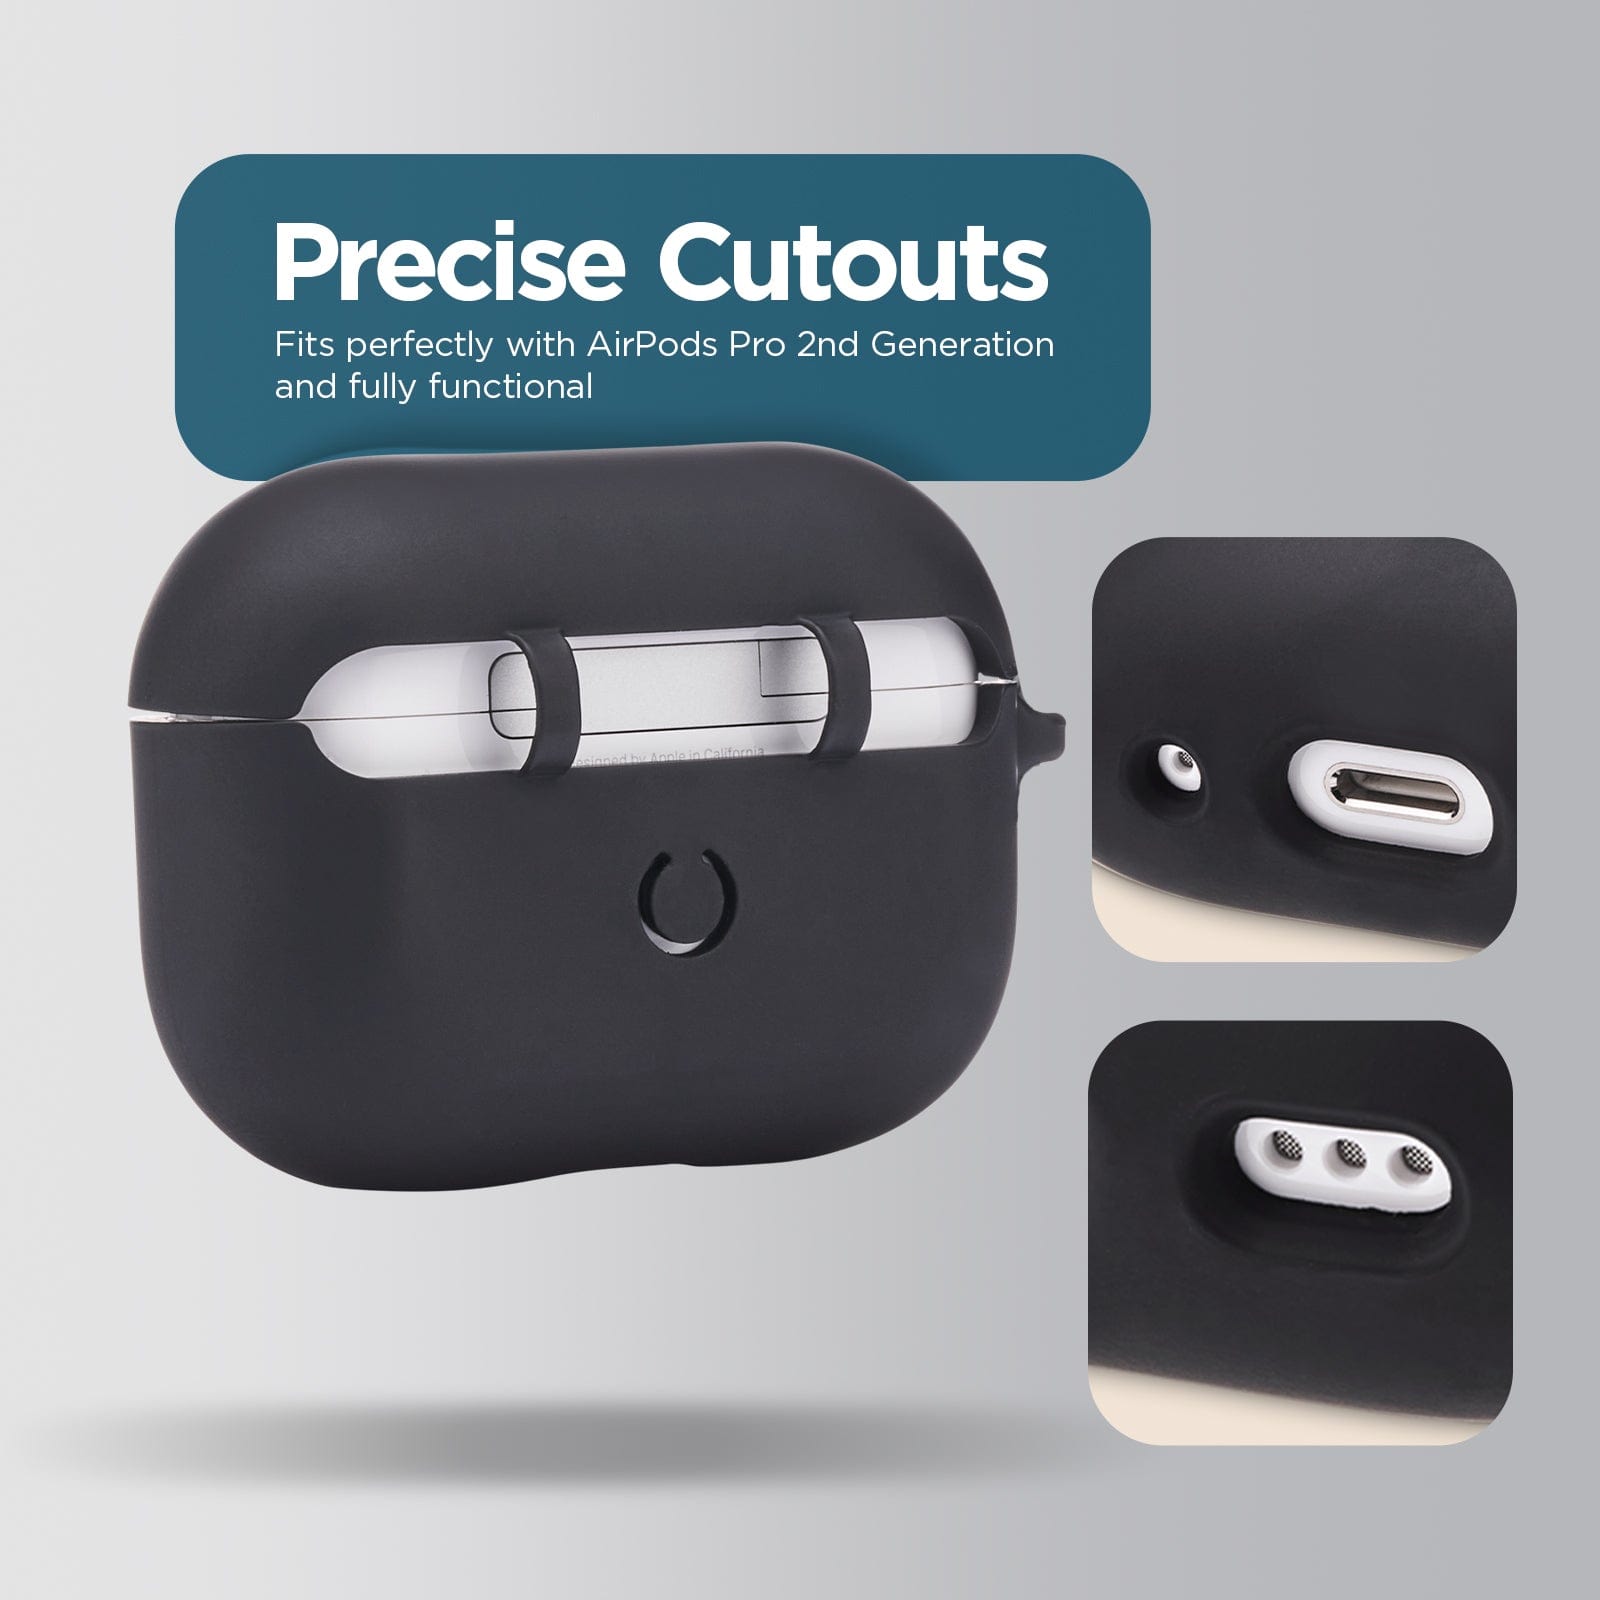 PRECISE CUTOUTS FITS PERFECTLY WITH AIRPODS PRO 2ND GENERATION AND FULLY FUNCTIONAL